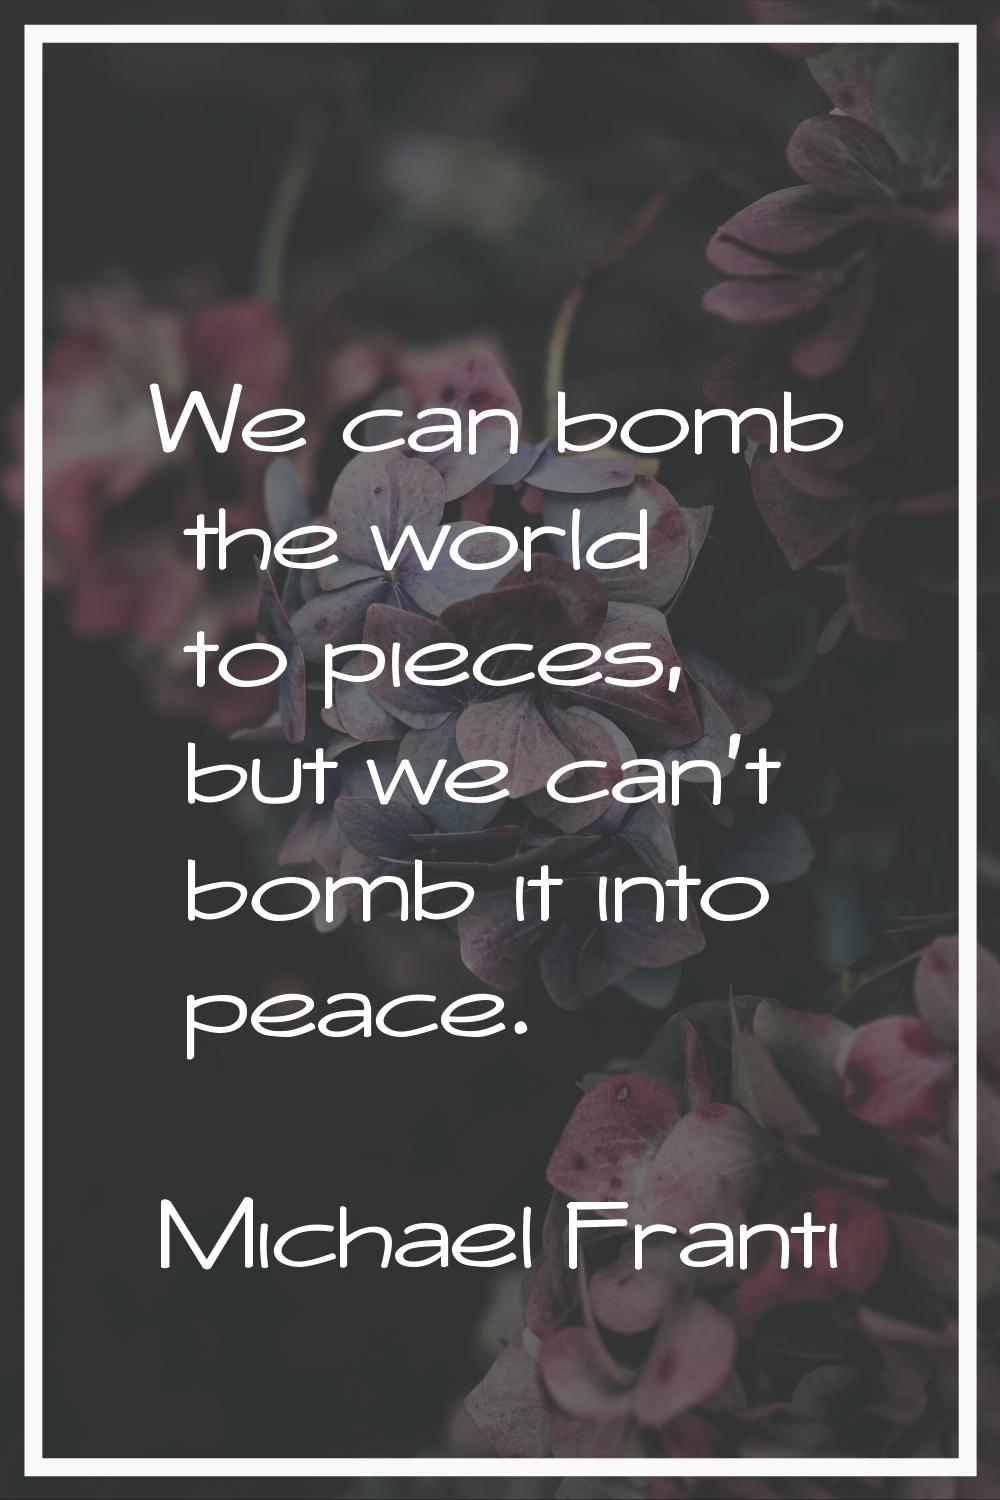 We can bomb the world to pieces, but we can't bomb it into peace.